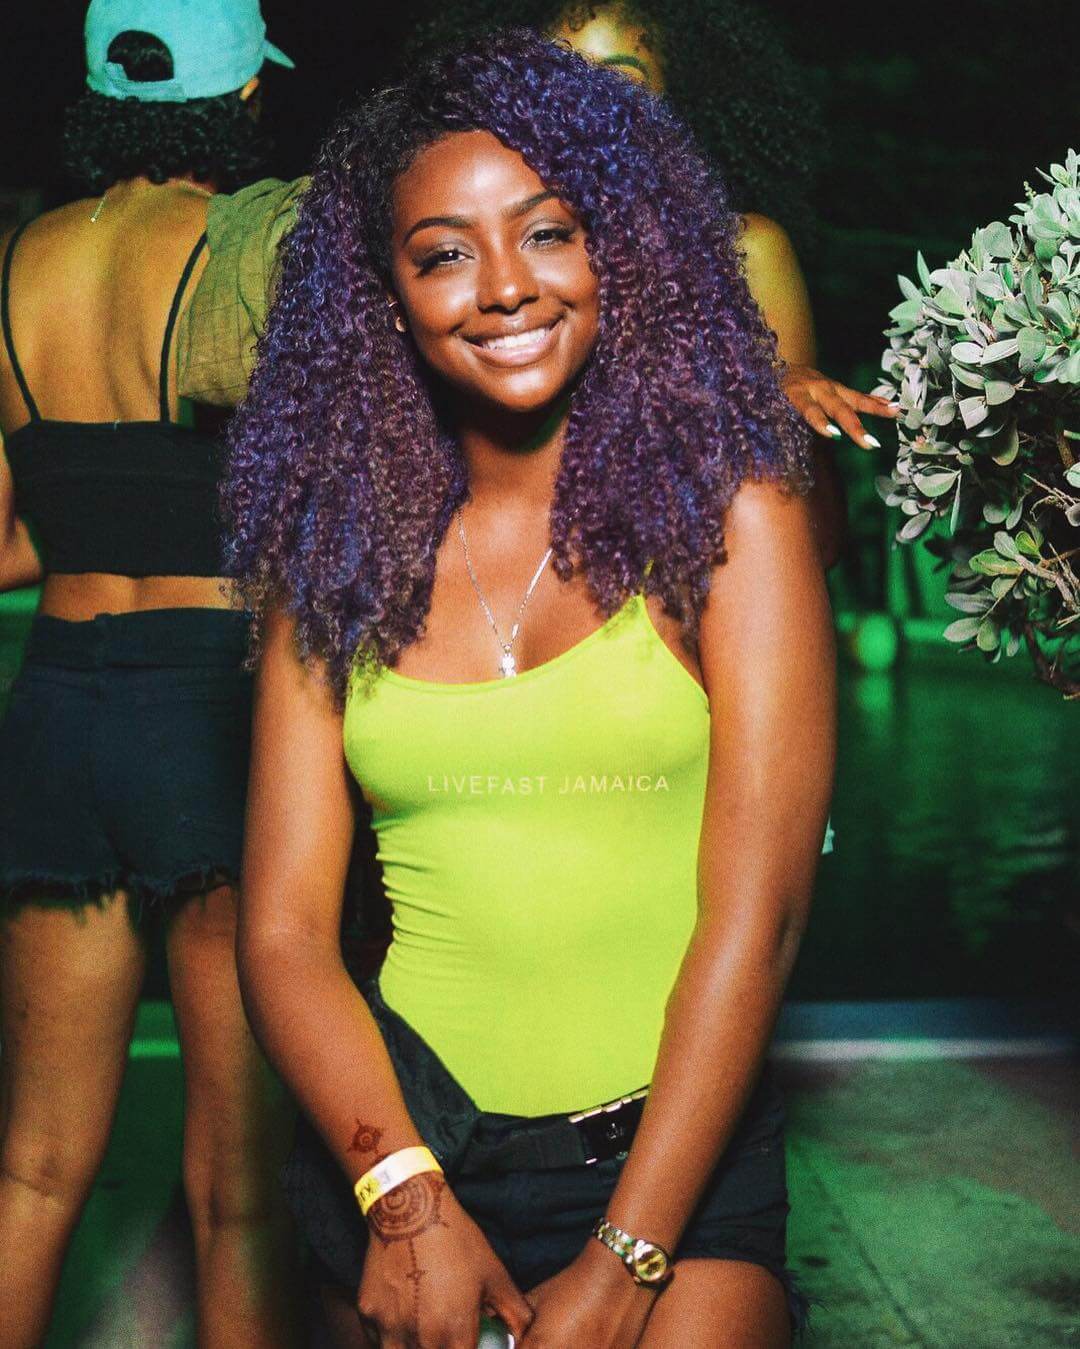 Hot Picture of Justine Skye Are Here To Increase Your Heartbeats. Best Of Comic Books